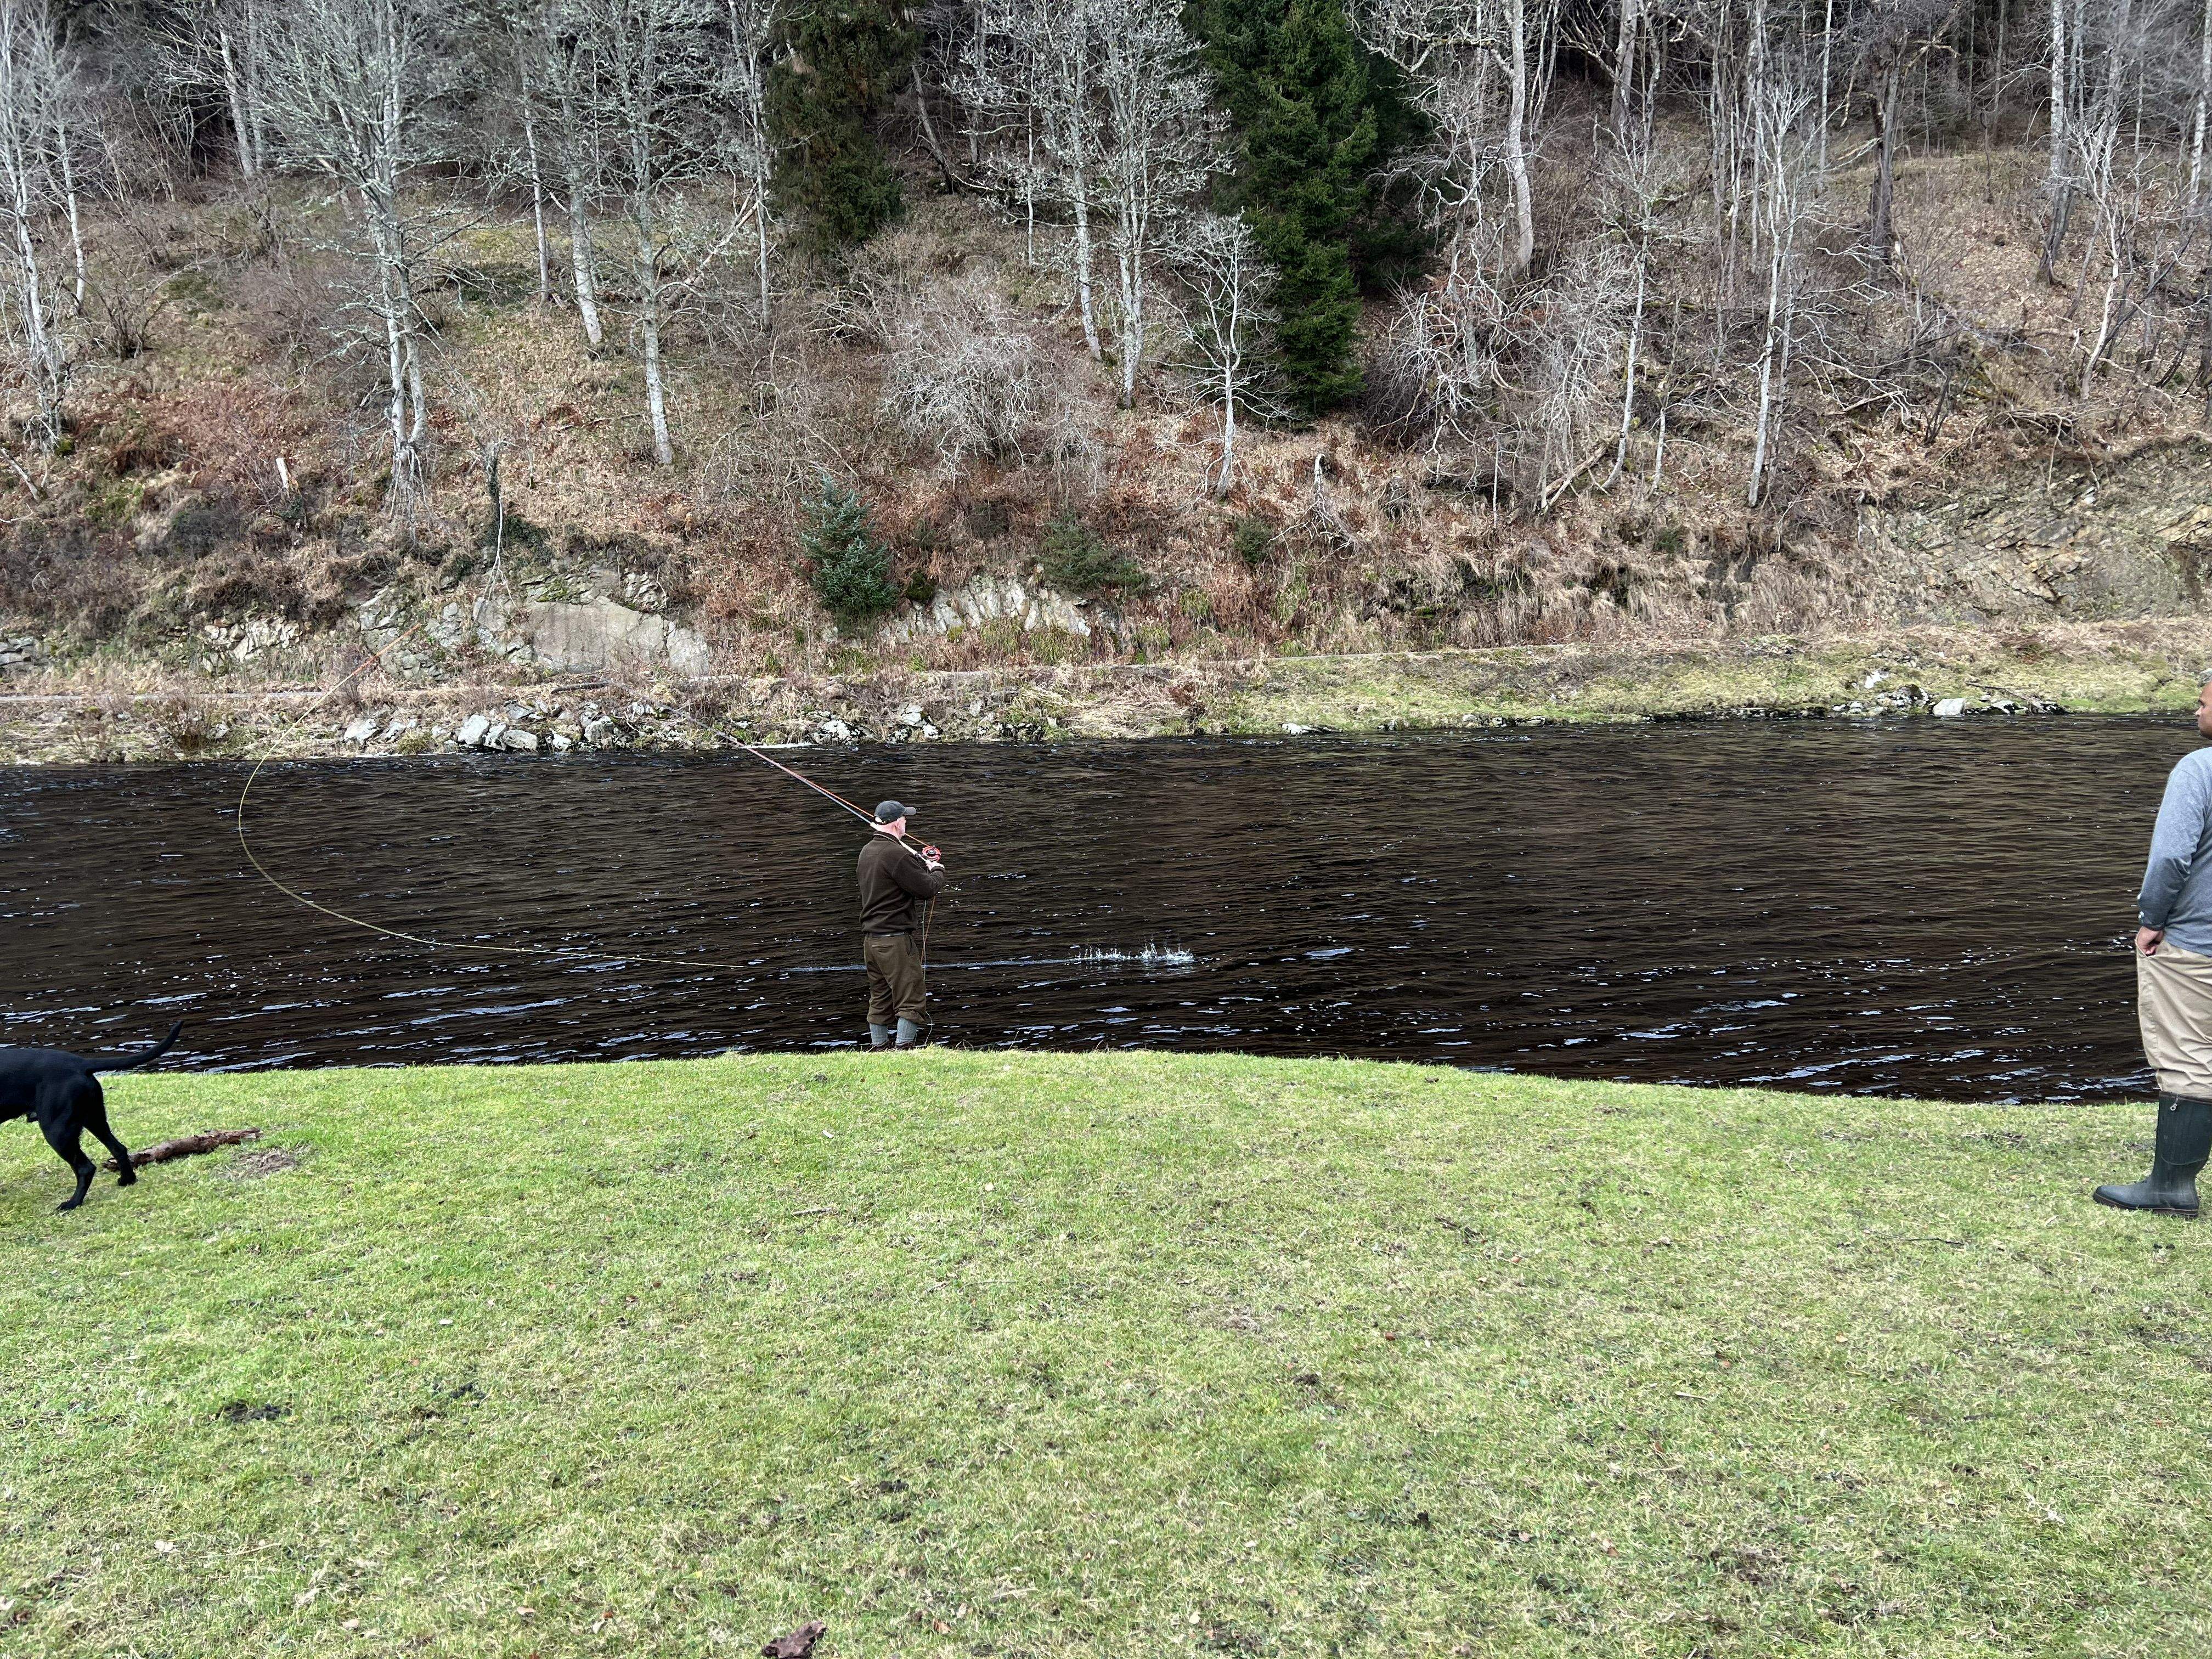 Fly Fishing in the river